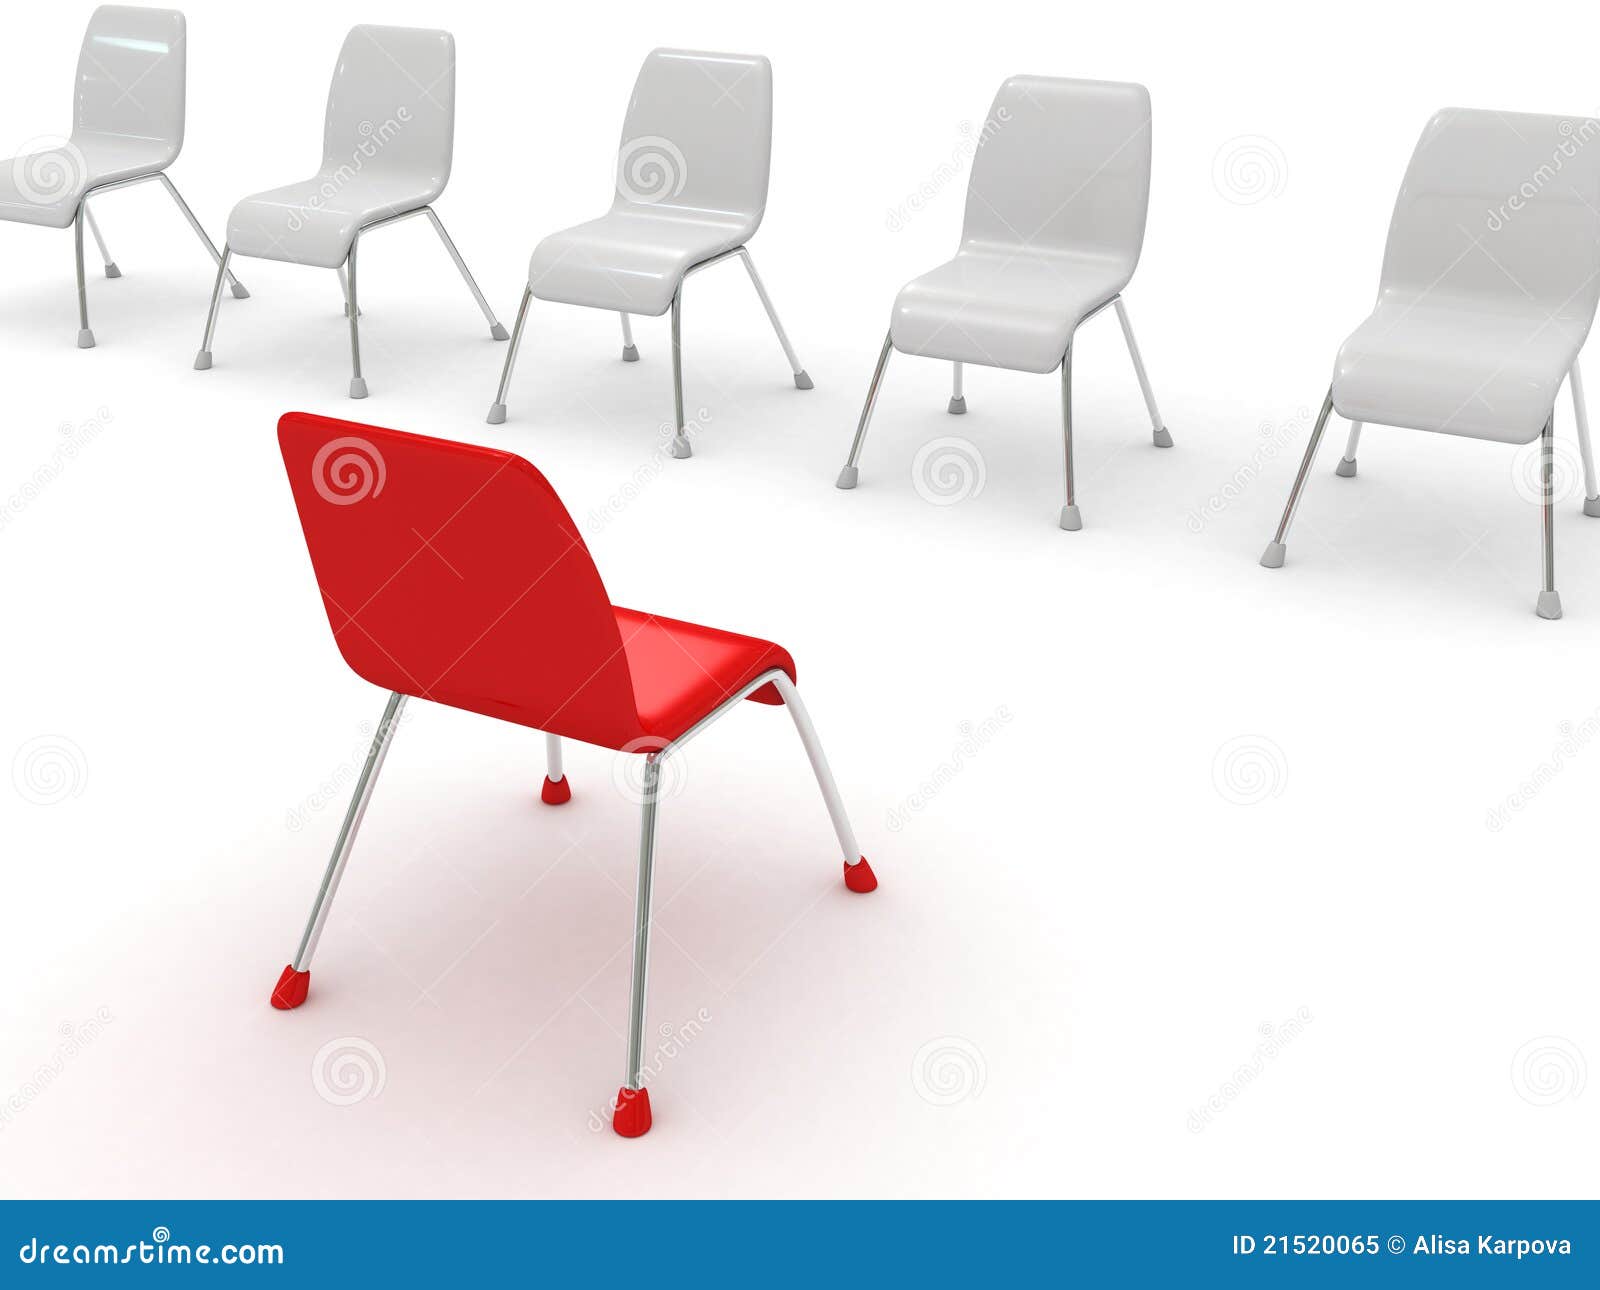 Leadership Concept with Red Chair Stock Illustration - Illustration of ...